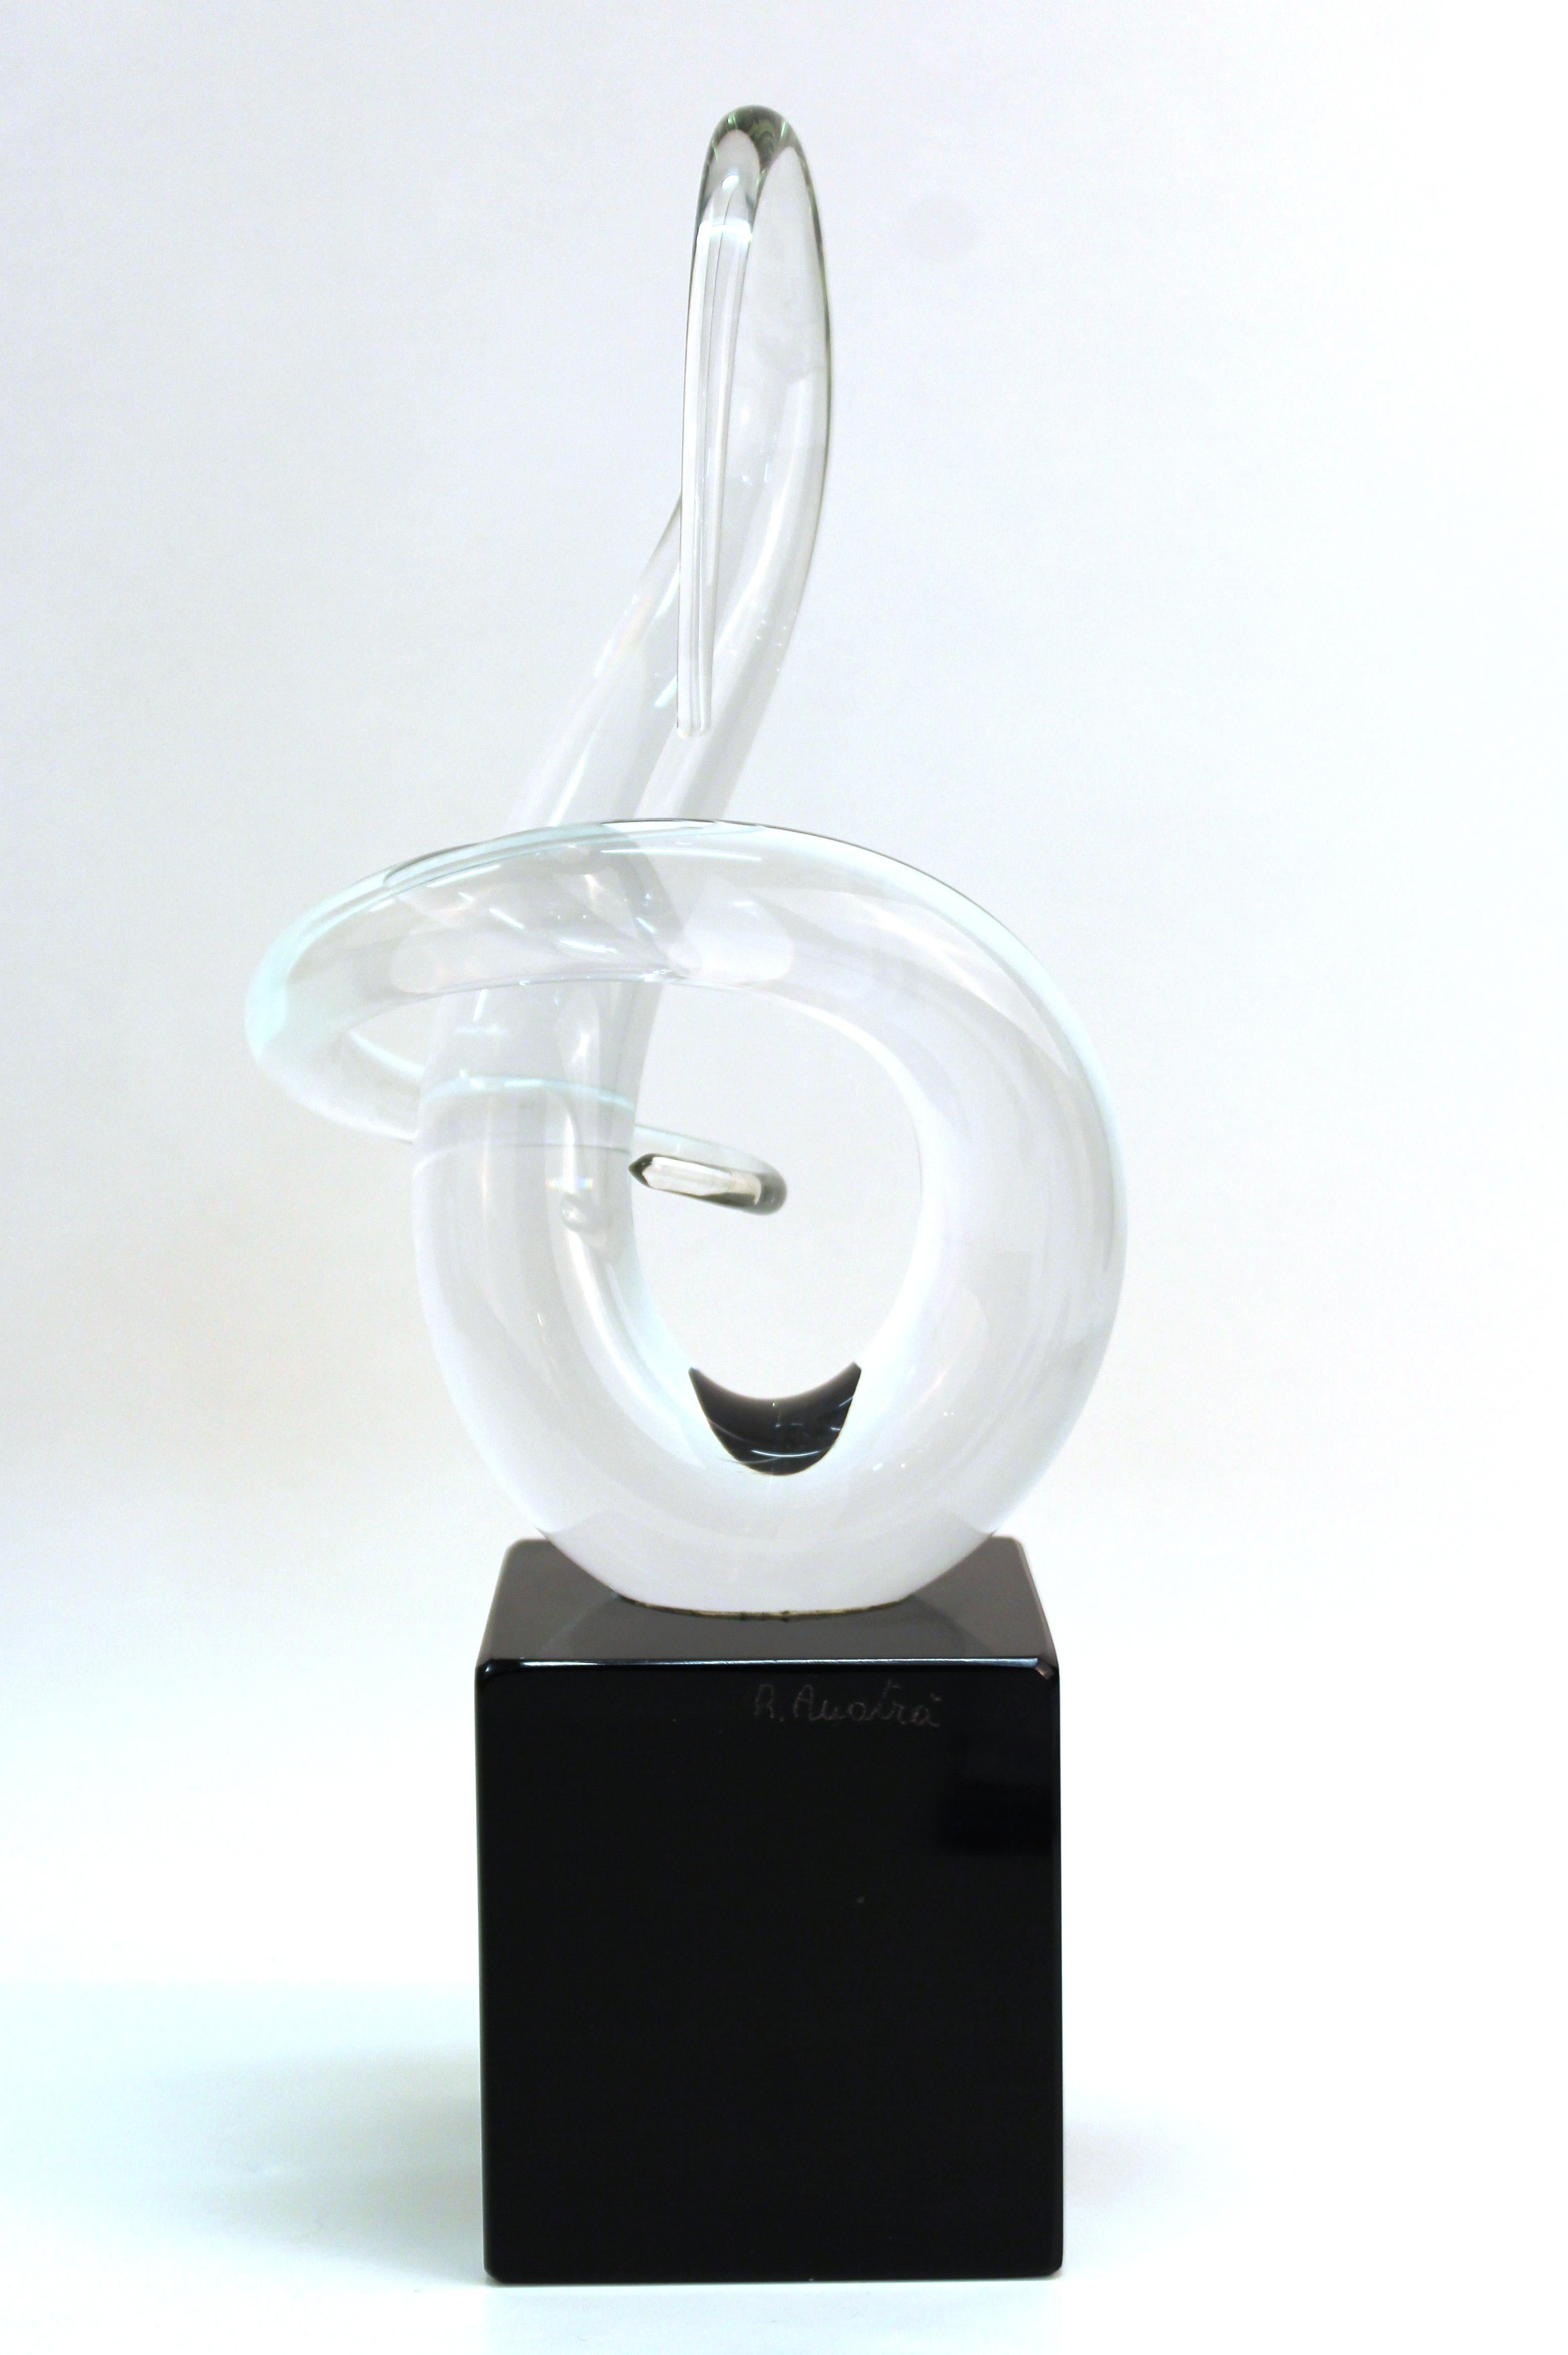 Italian Modern abstract art glass tabletop sculpture in clear glass atop a black base. The piece is signed 'R. Auotra' and dates from the 1980s. In great vintage condition with age-appropriate wear and use.